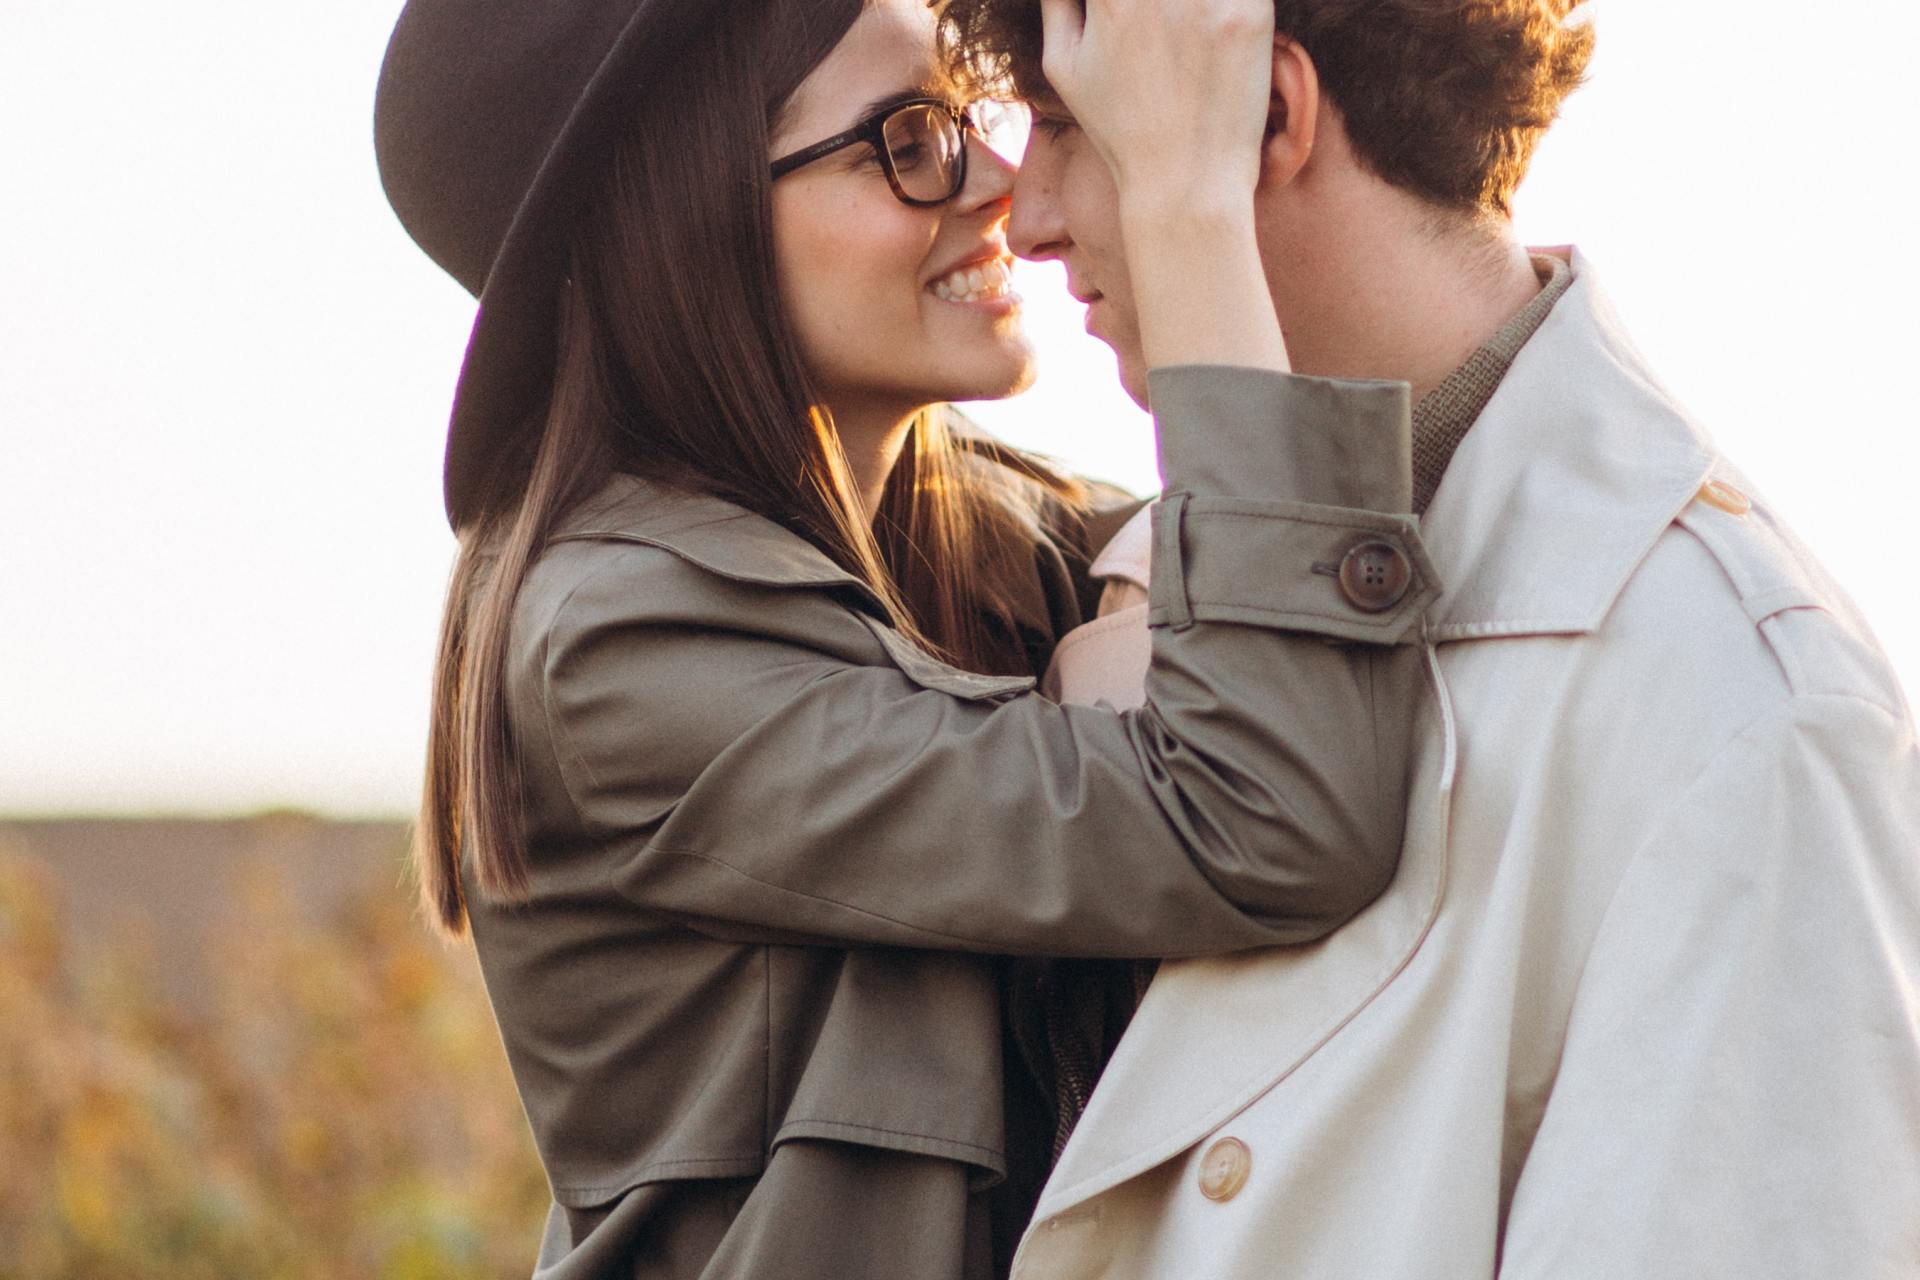 X Ways You're Accidentally Signaling That You Don't Want To Date (When You Actually Do)